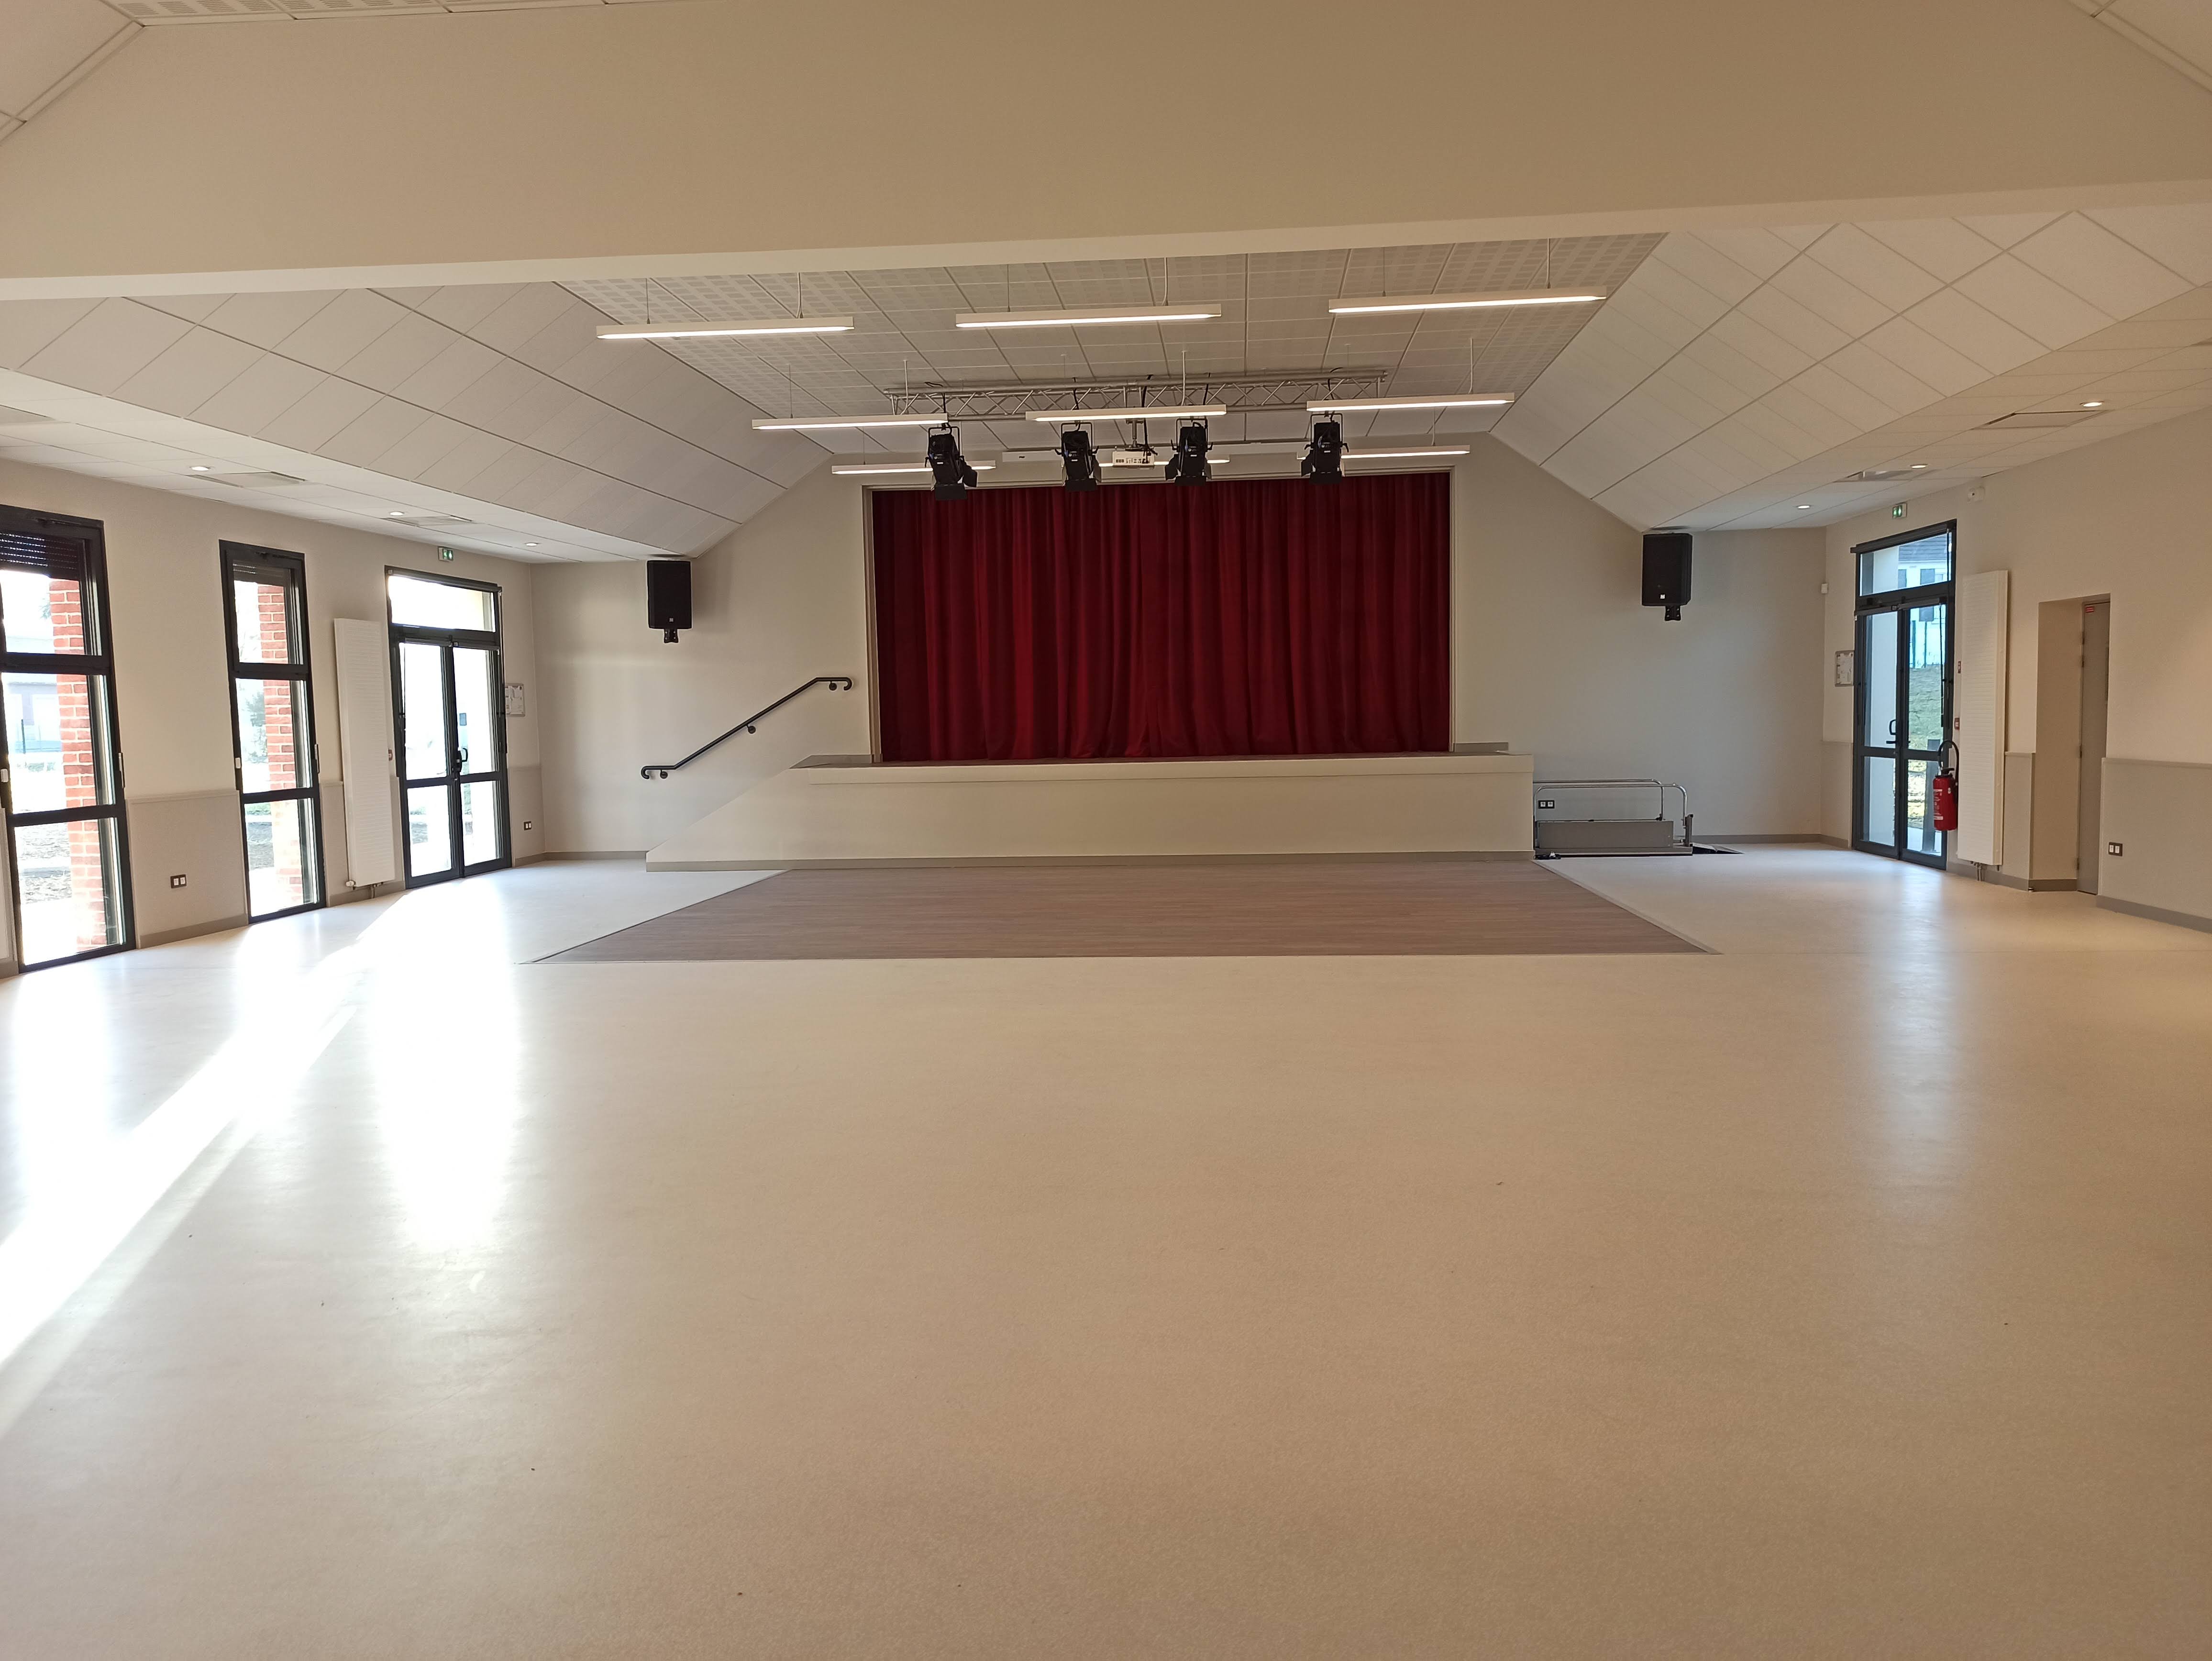 Salle communale multifonctions